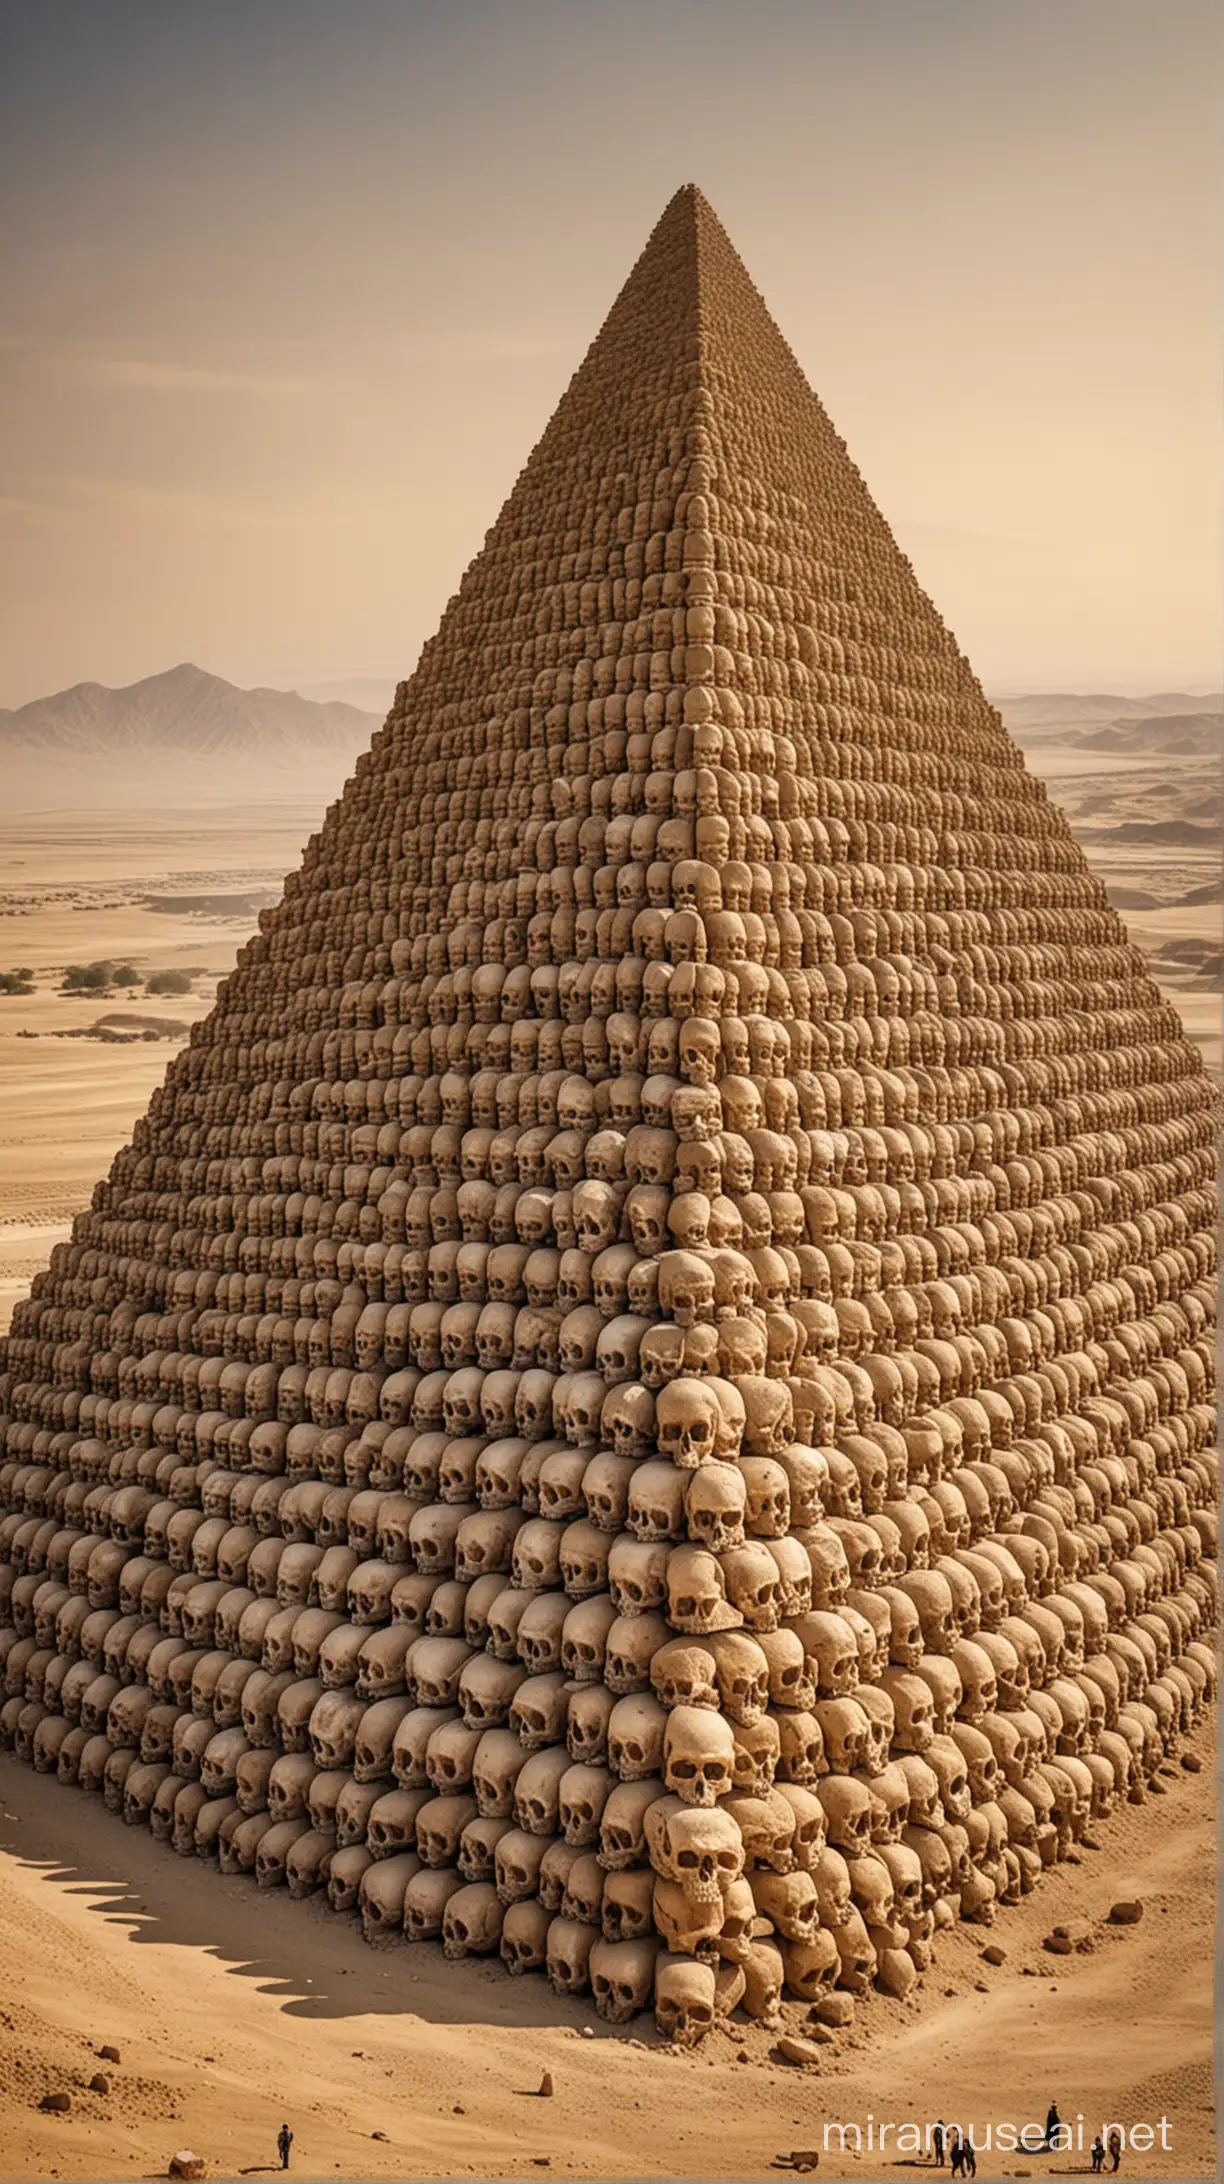 The pyramid of 70,000 skulls built by Tamerlane in Persia: A towering pyramid rises in a vast desert landscape. Each stone of the pyramid is composed of thousands of human skulls. At the apex of the structure, densely arranged skulls create an imposing and terrifying sight.

